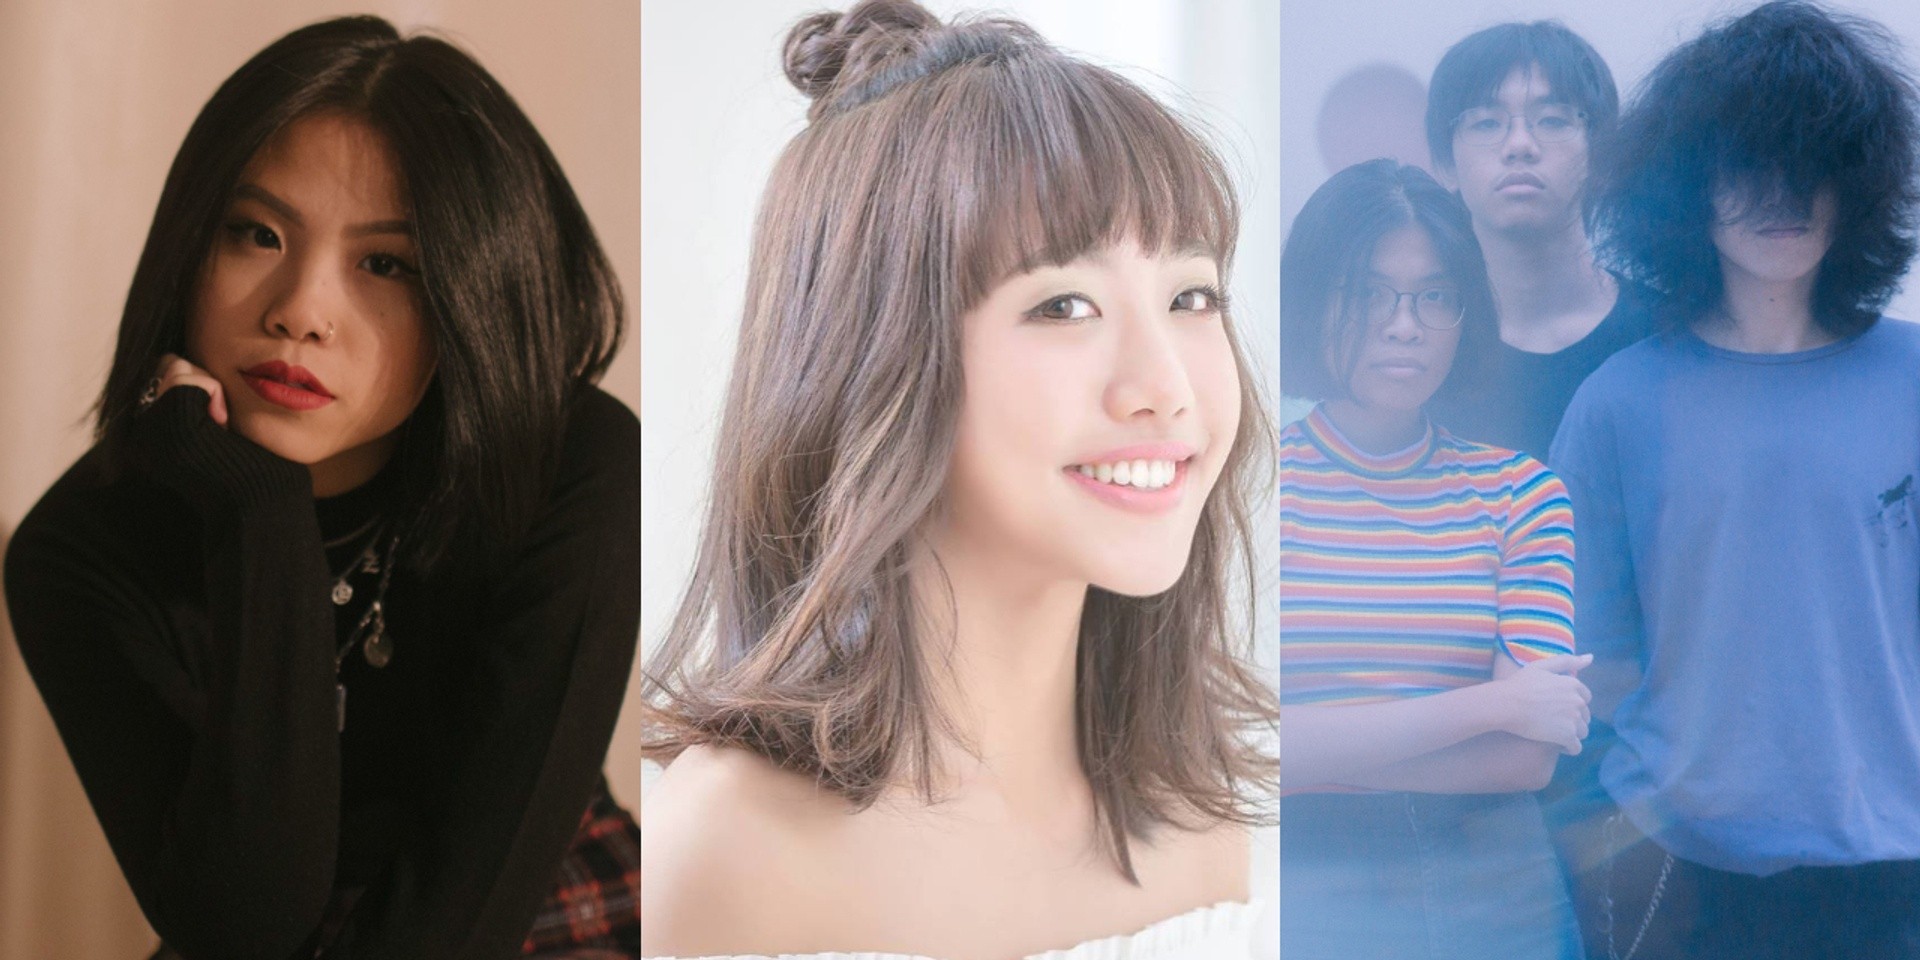 Ariel Tsai, Joie Tan and Subsonic Eye to play at first Marina Bay Sands' Open Stage of 2019